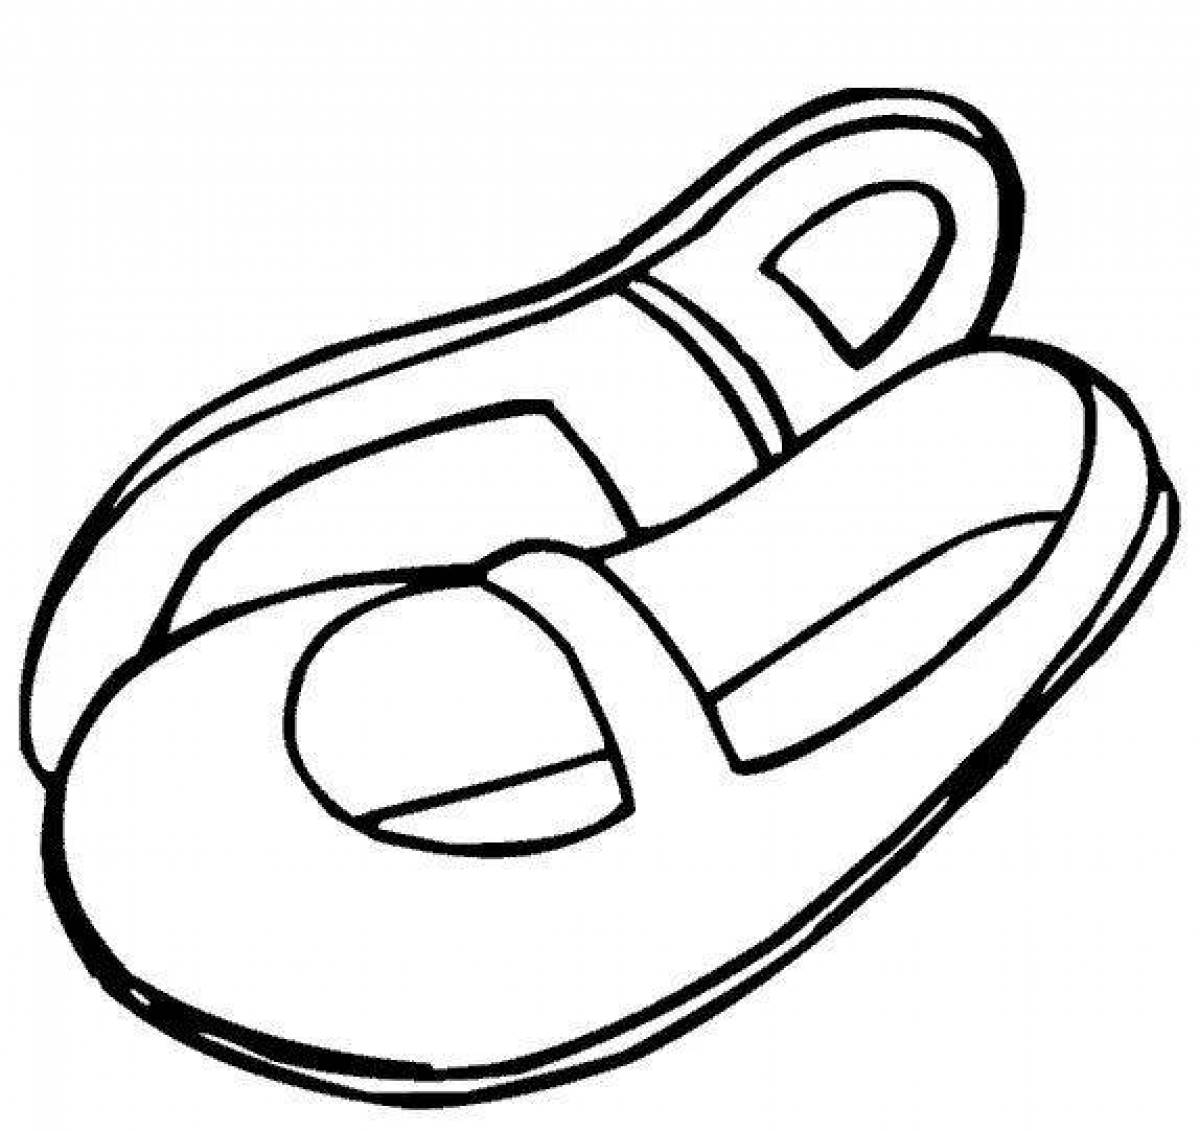 Coloring page bold slippers